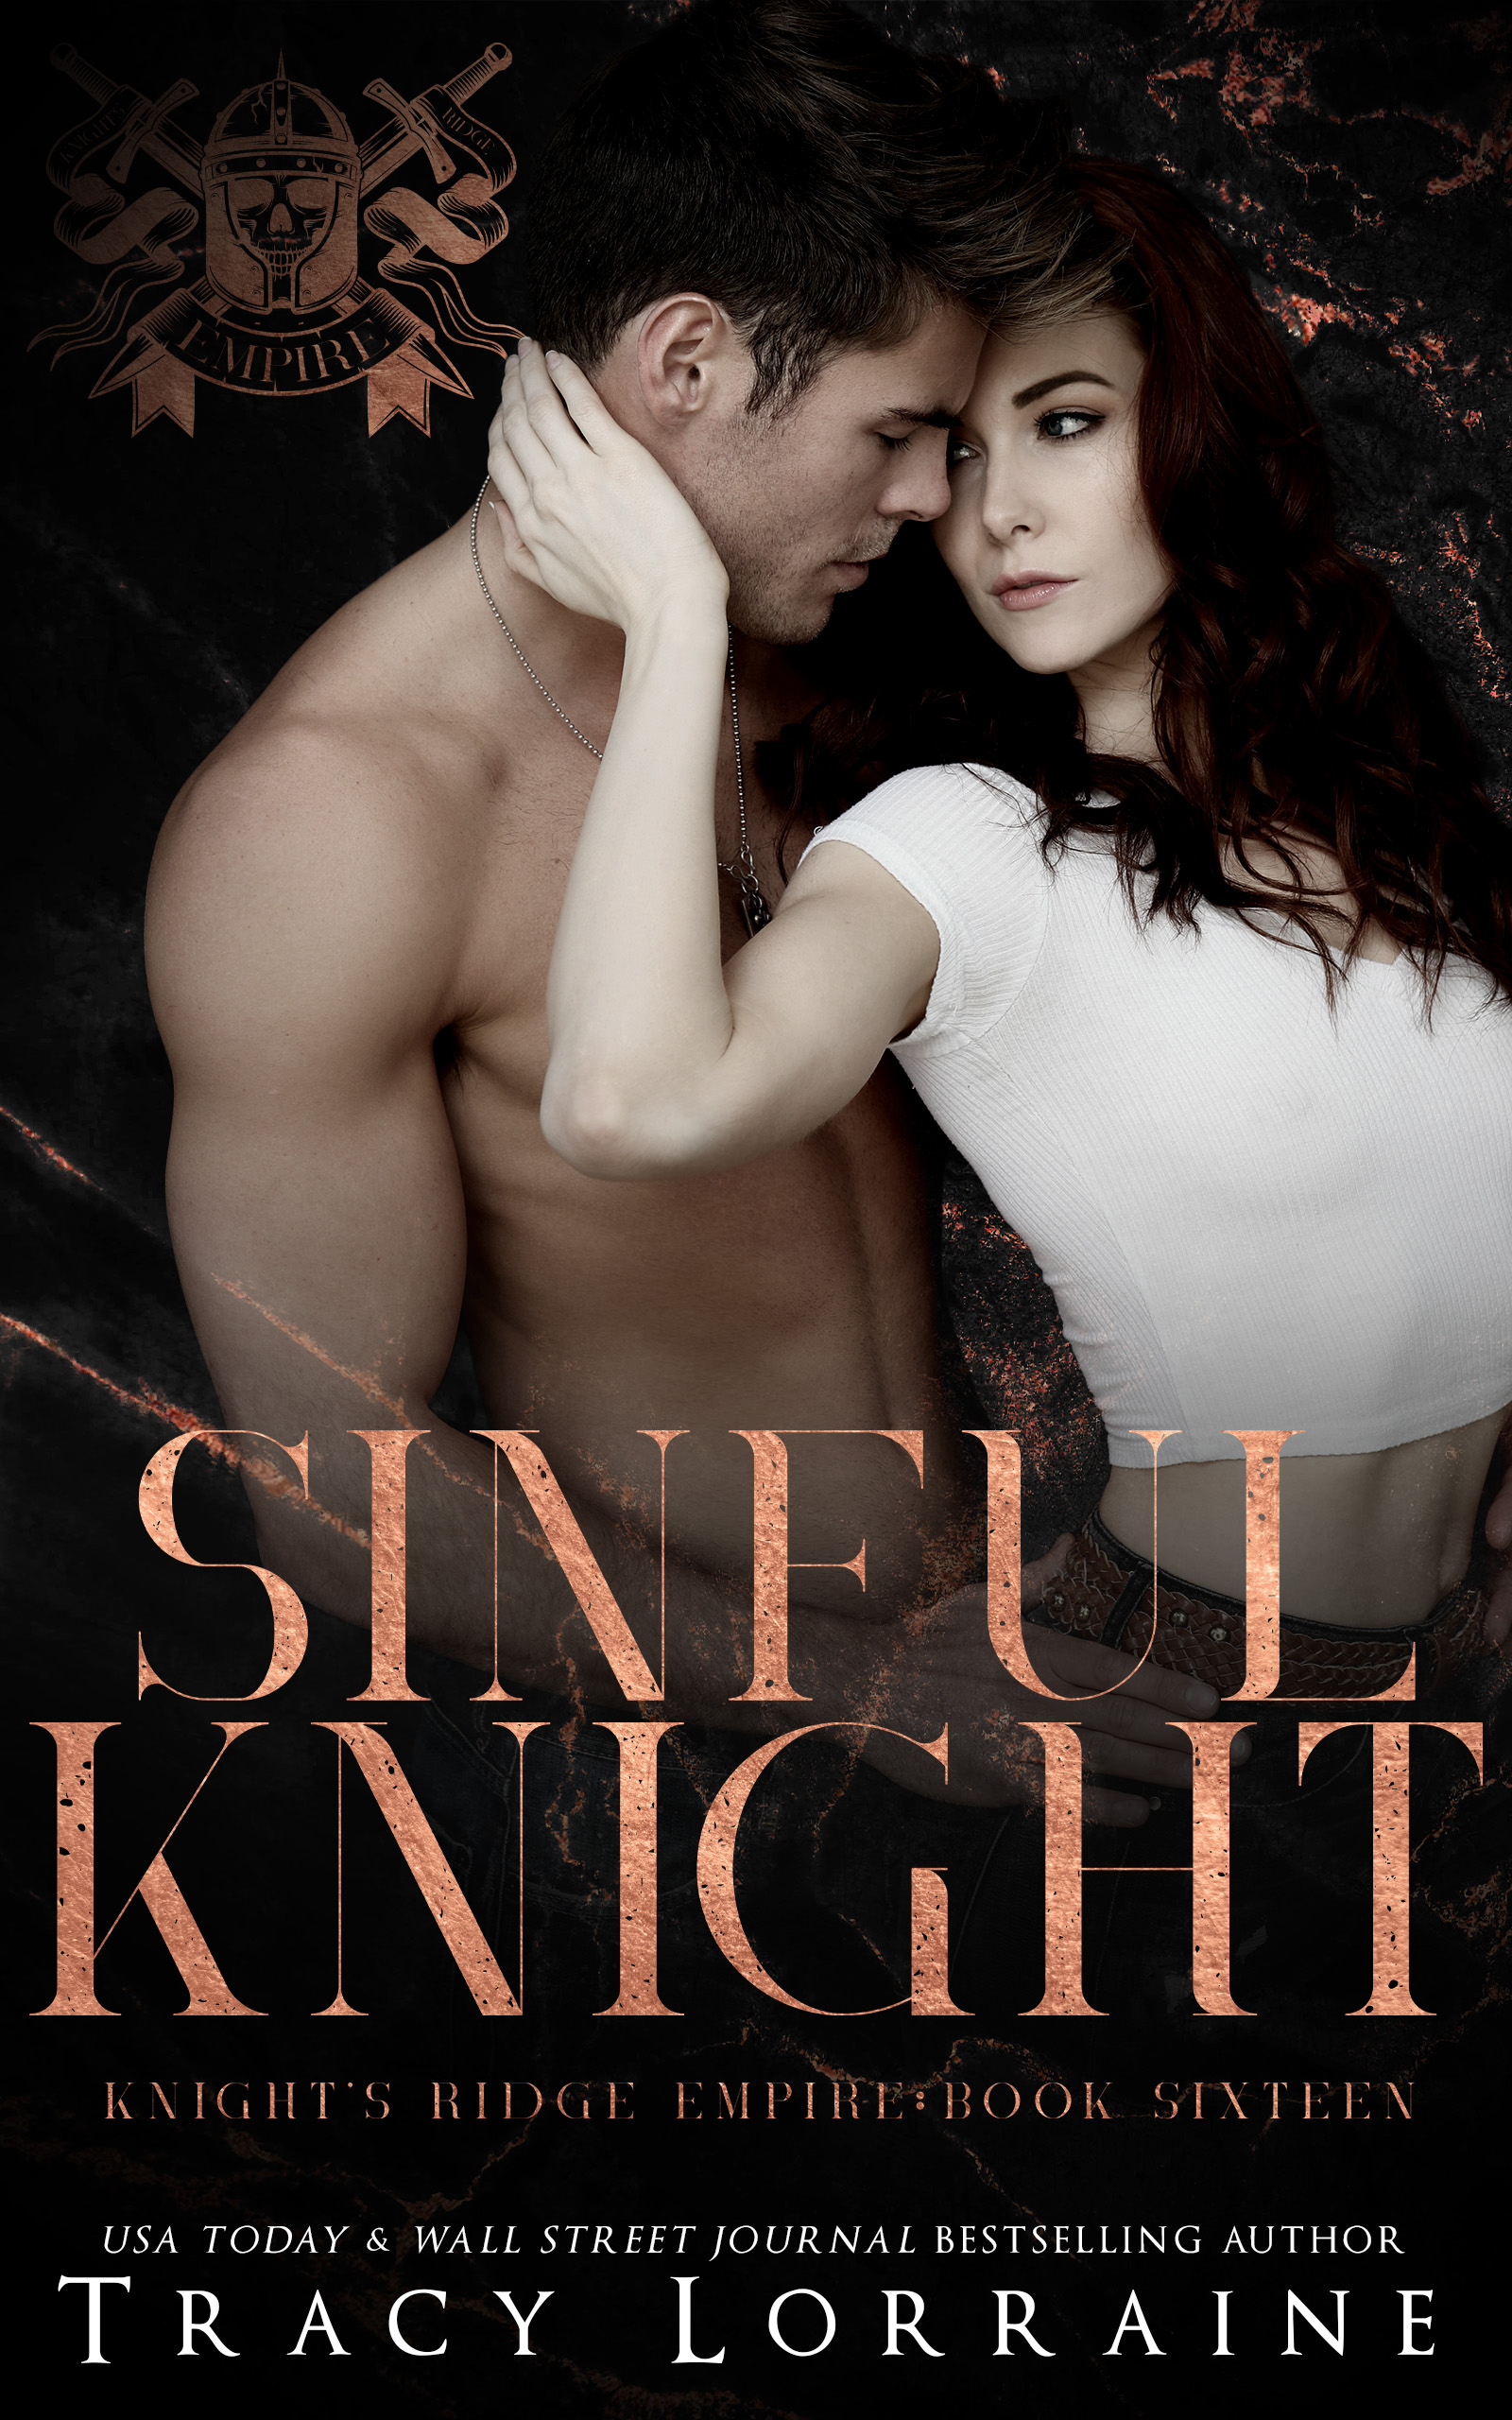 Sinful Knight by Tracy Lorraine PDF Download